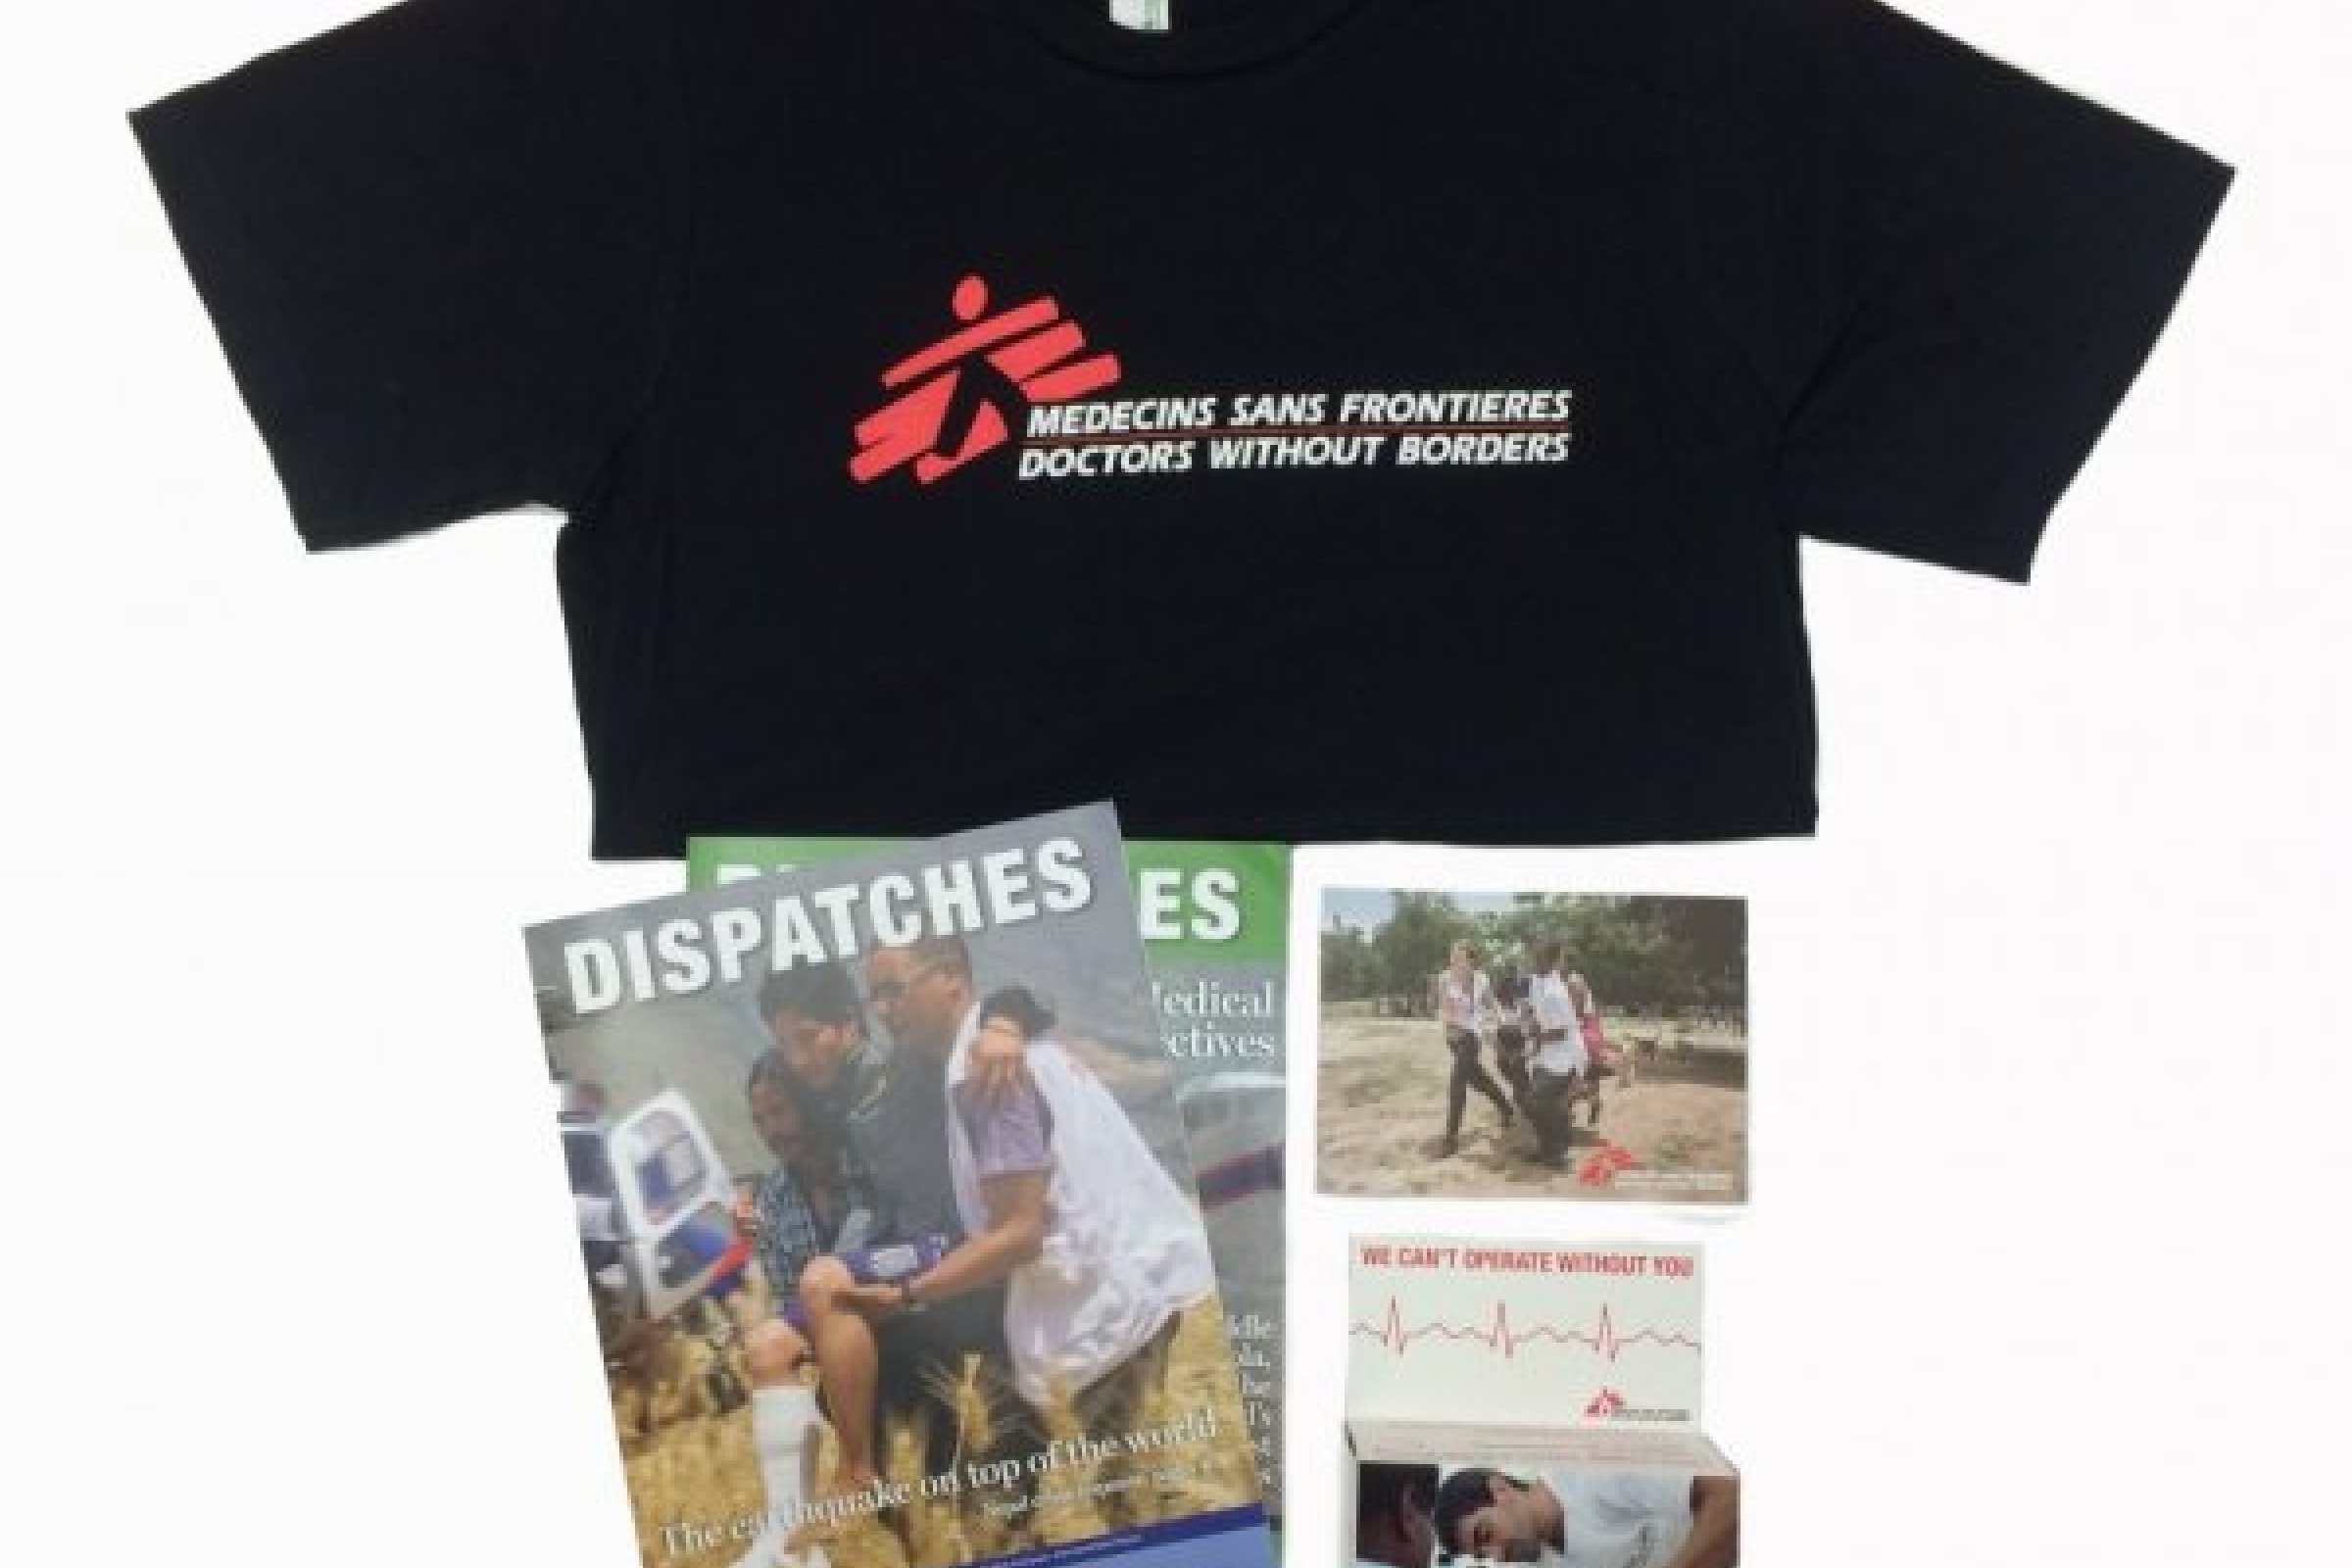 MSF merchandise available for university groups